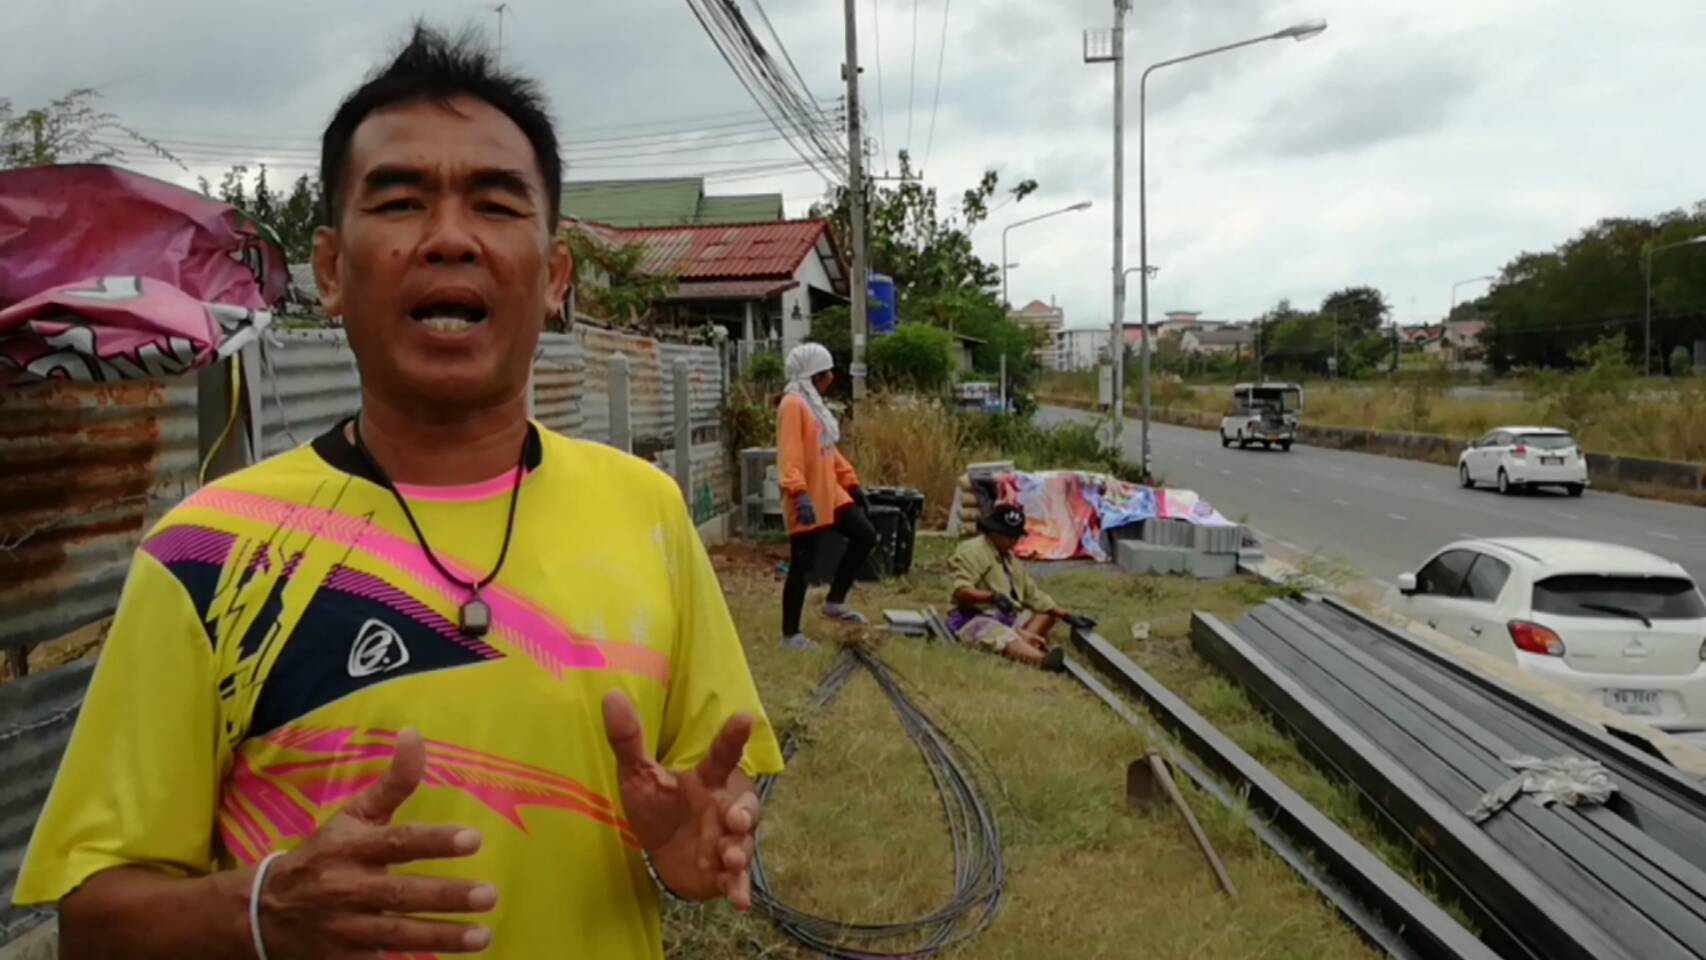 Pattaya’s Nernrodfai Community President Manoon Wongsena talks about how the community will soon have a recycling station to help protect the environment.